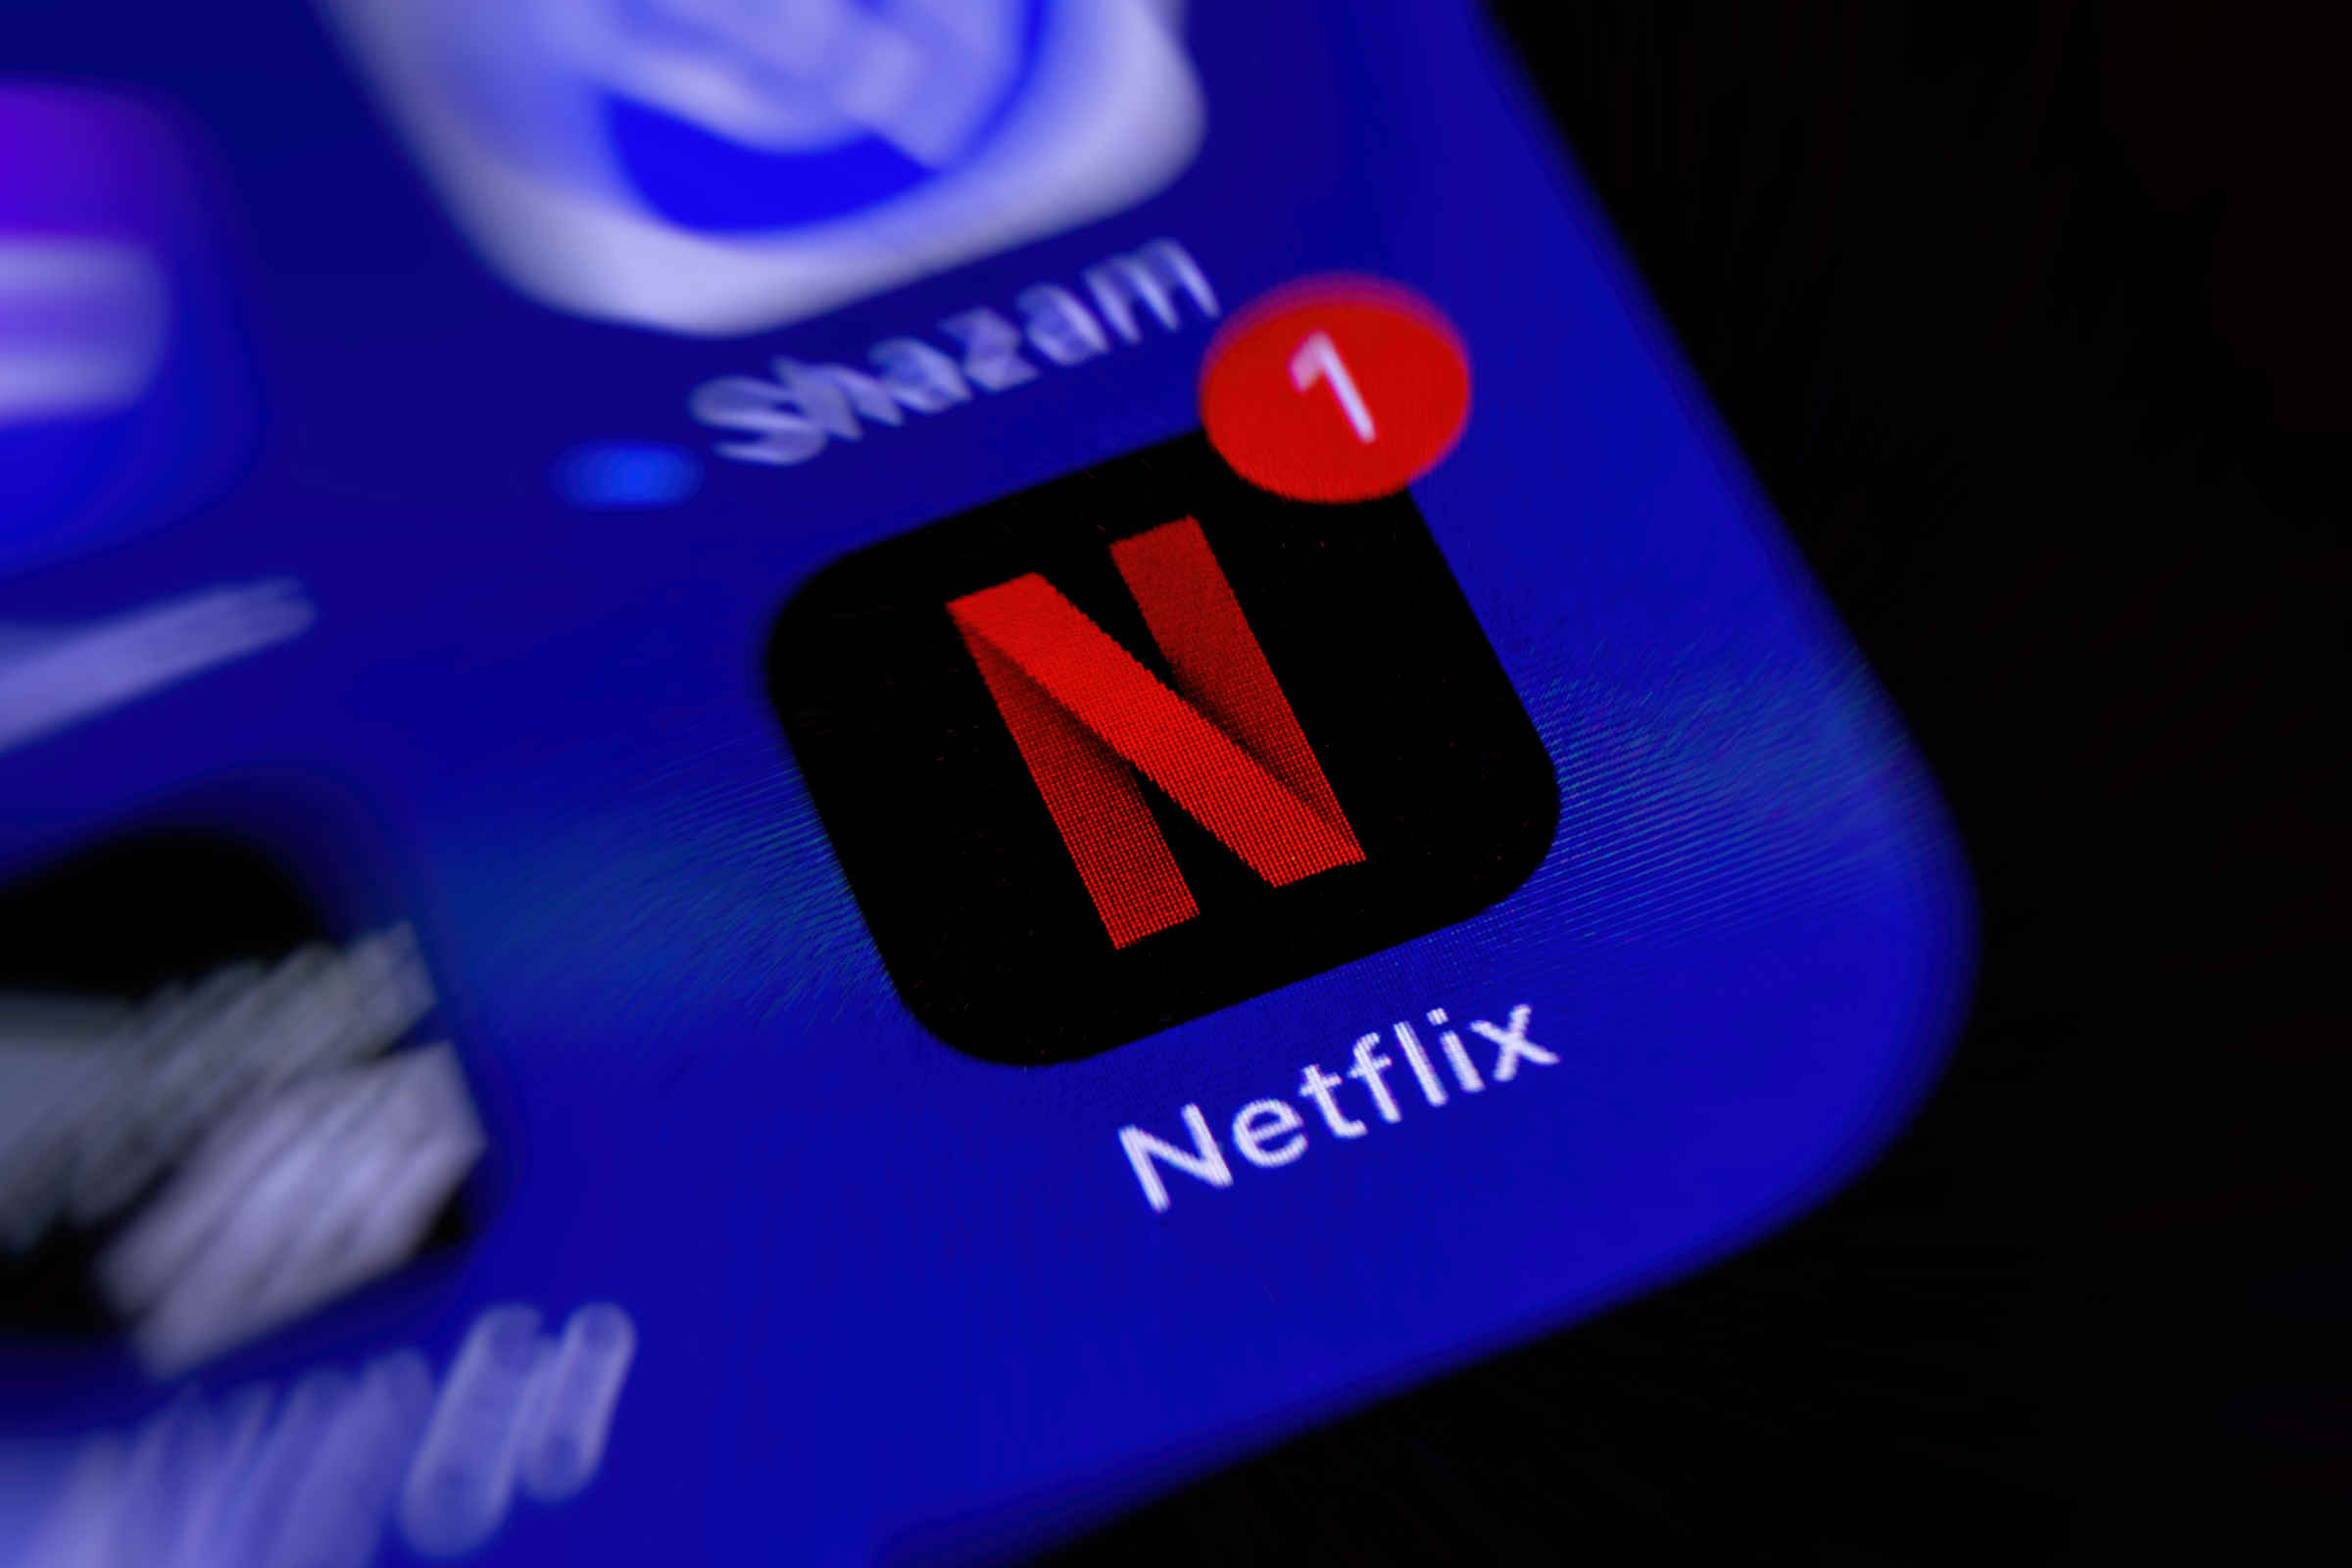 From DVDs to Netflix, cable channels have made the transition to streaming services. But the more they charge, the more people turn to alternate options.